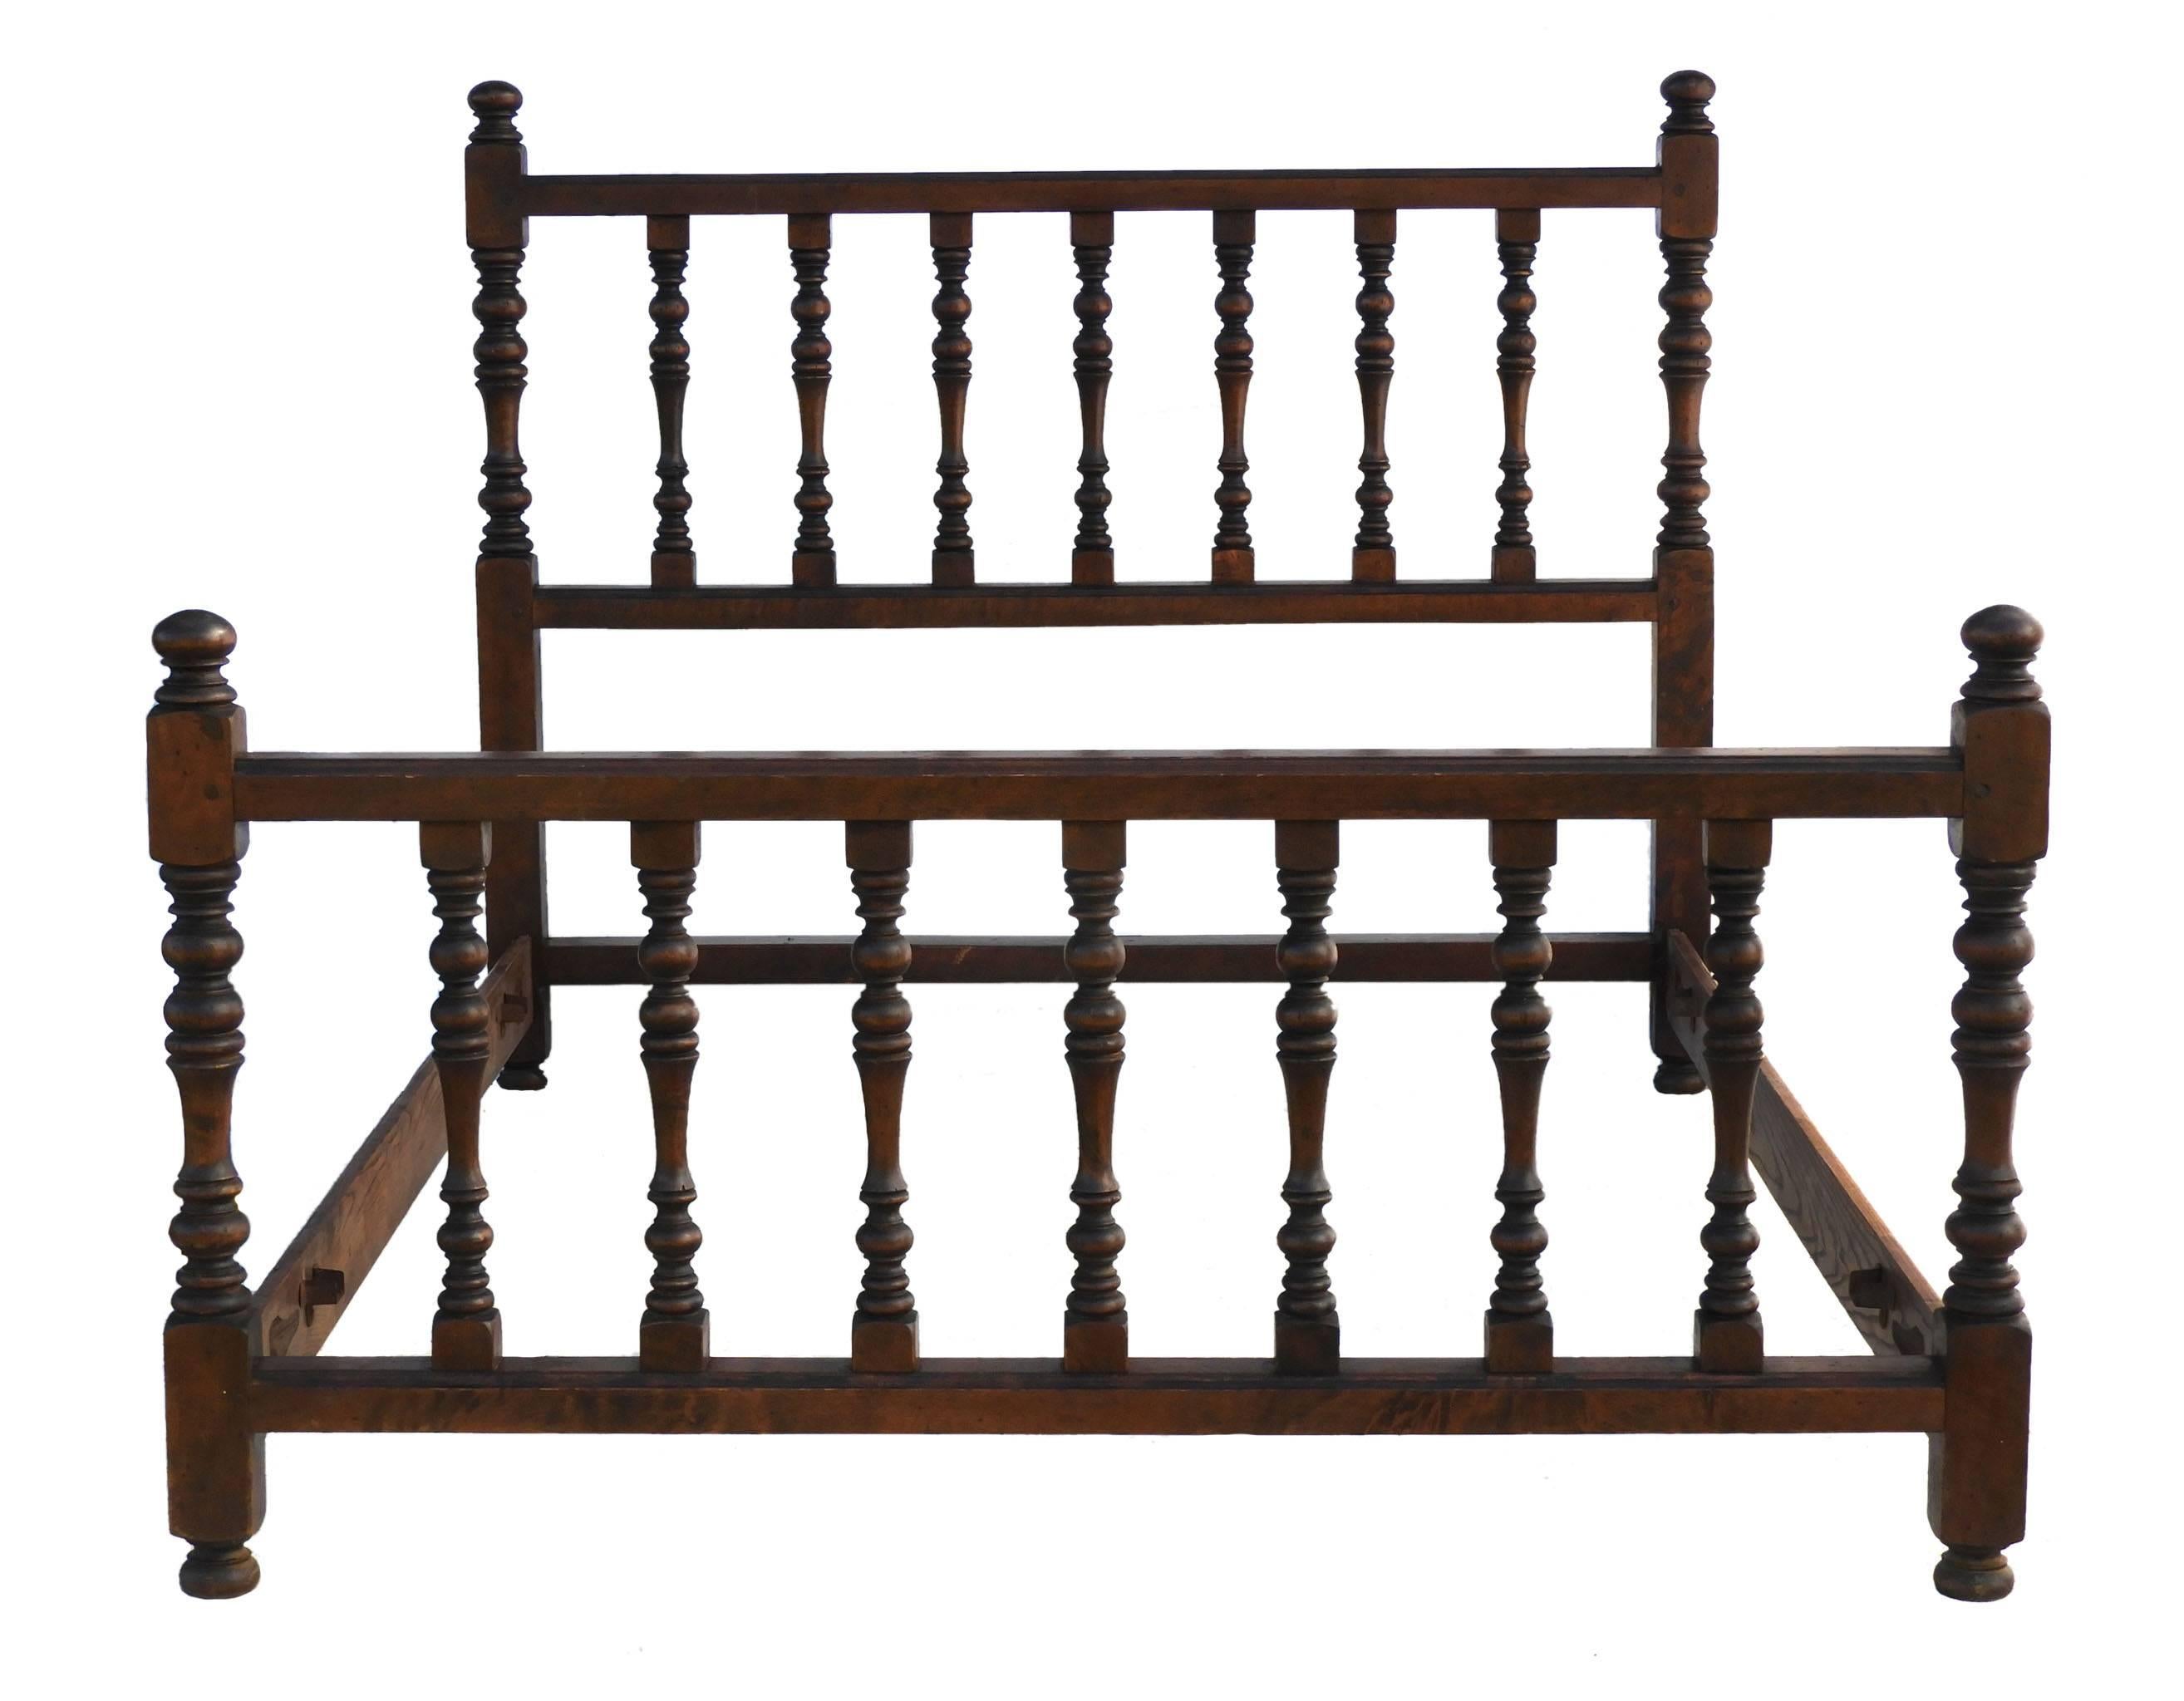 French antique bed UK king US queen-size, 19th century
French Country House
Basque Folk Art
Solid turned wood with lovely time worn patina to the old wood
Solid and sturdy
An unusual French provincial bed from a estate of a small Manoir in the